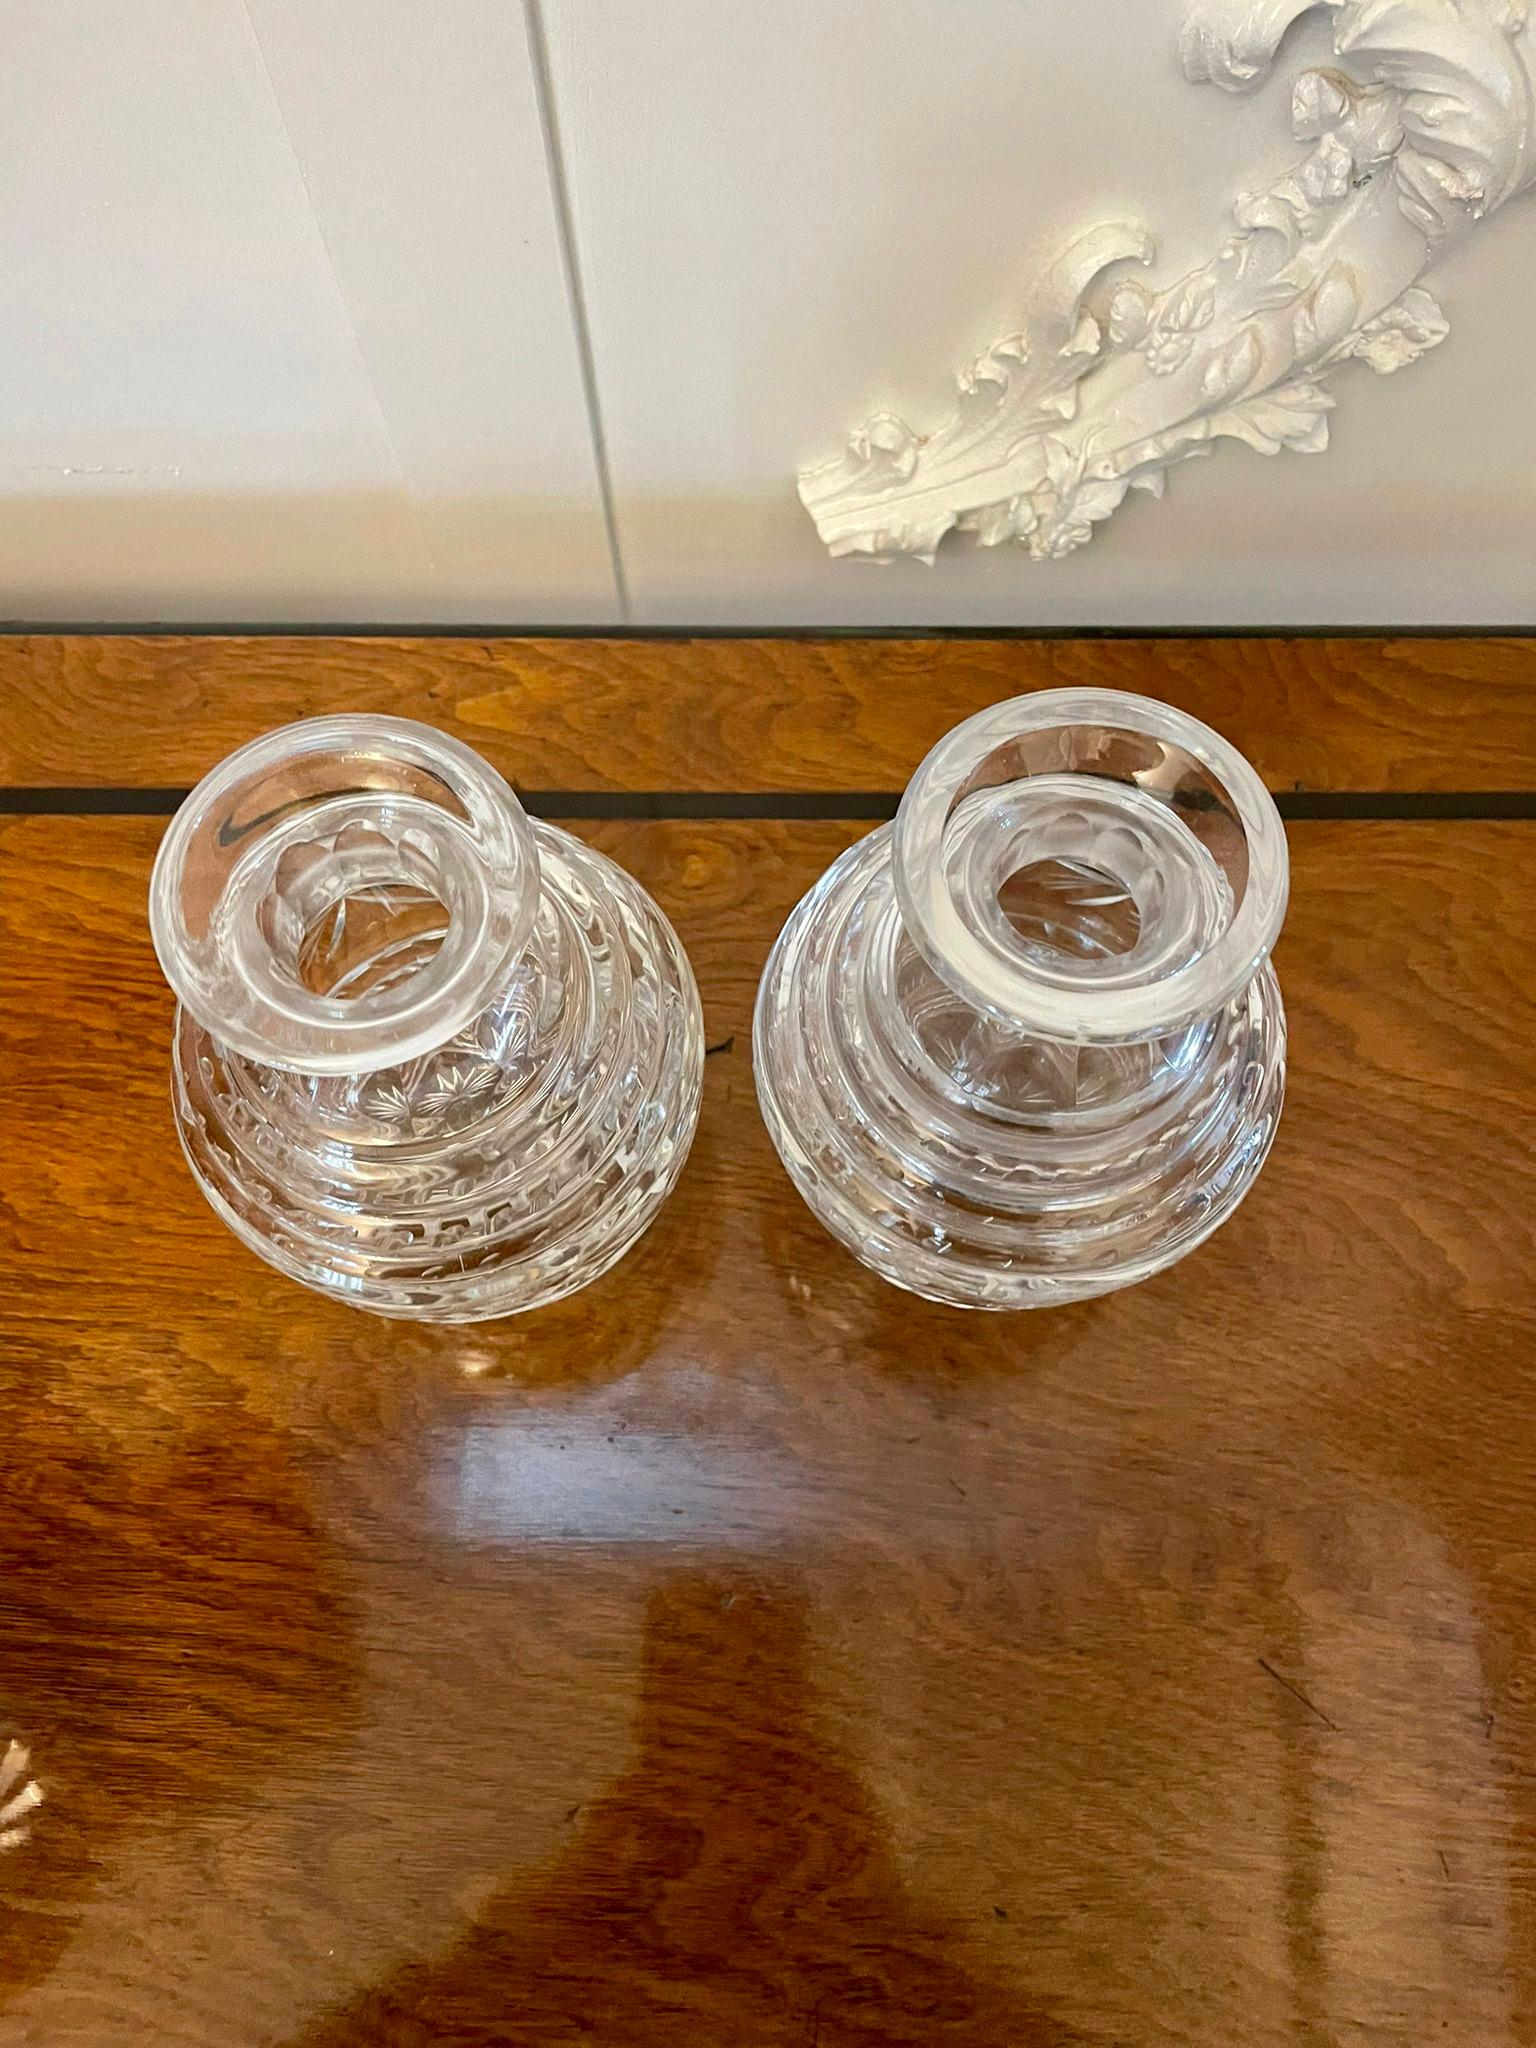 Pair of antique George III quality cut glass decanters having original cut glass mushroom shaped stoppers

In mint original condition

H 19.5 x W 12 x D 12cm
Date 1800.
 